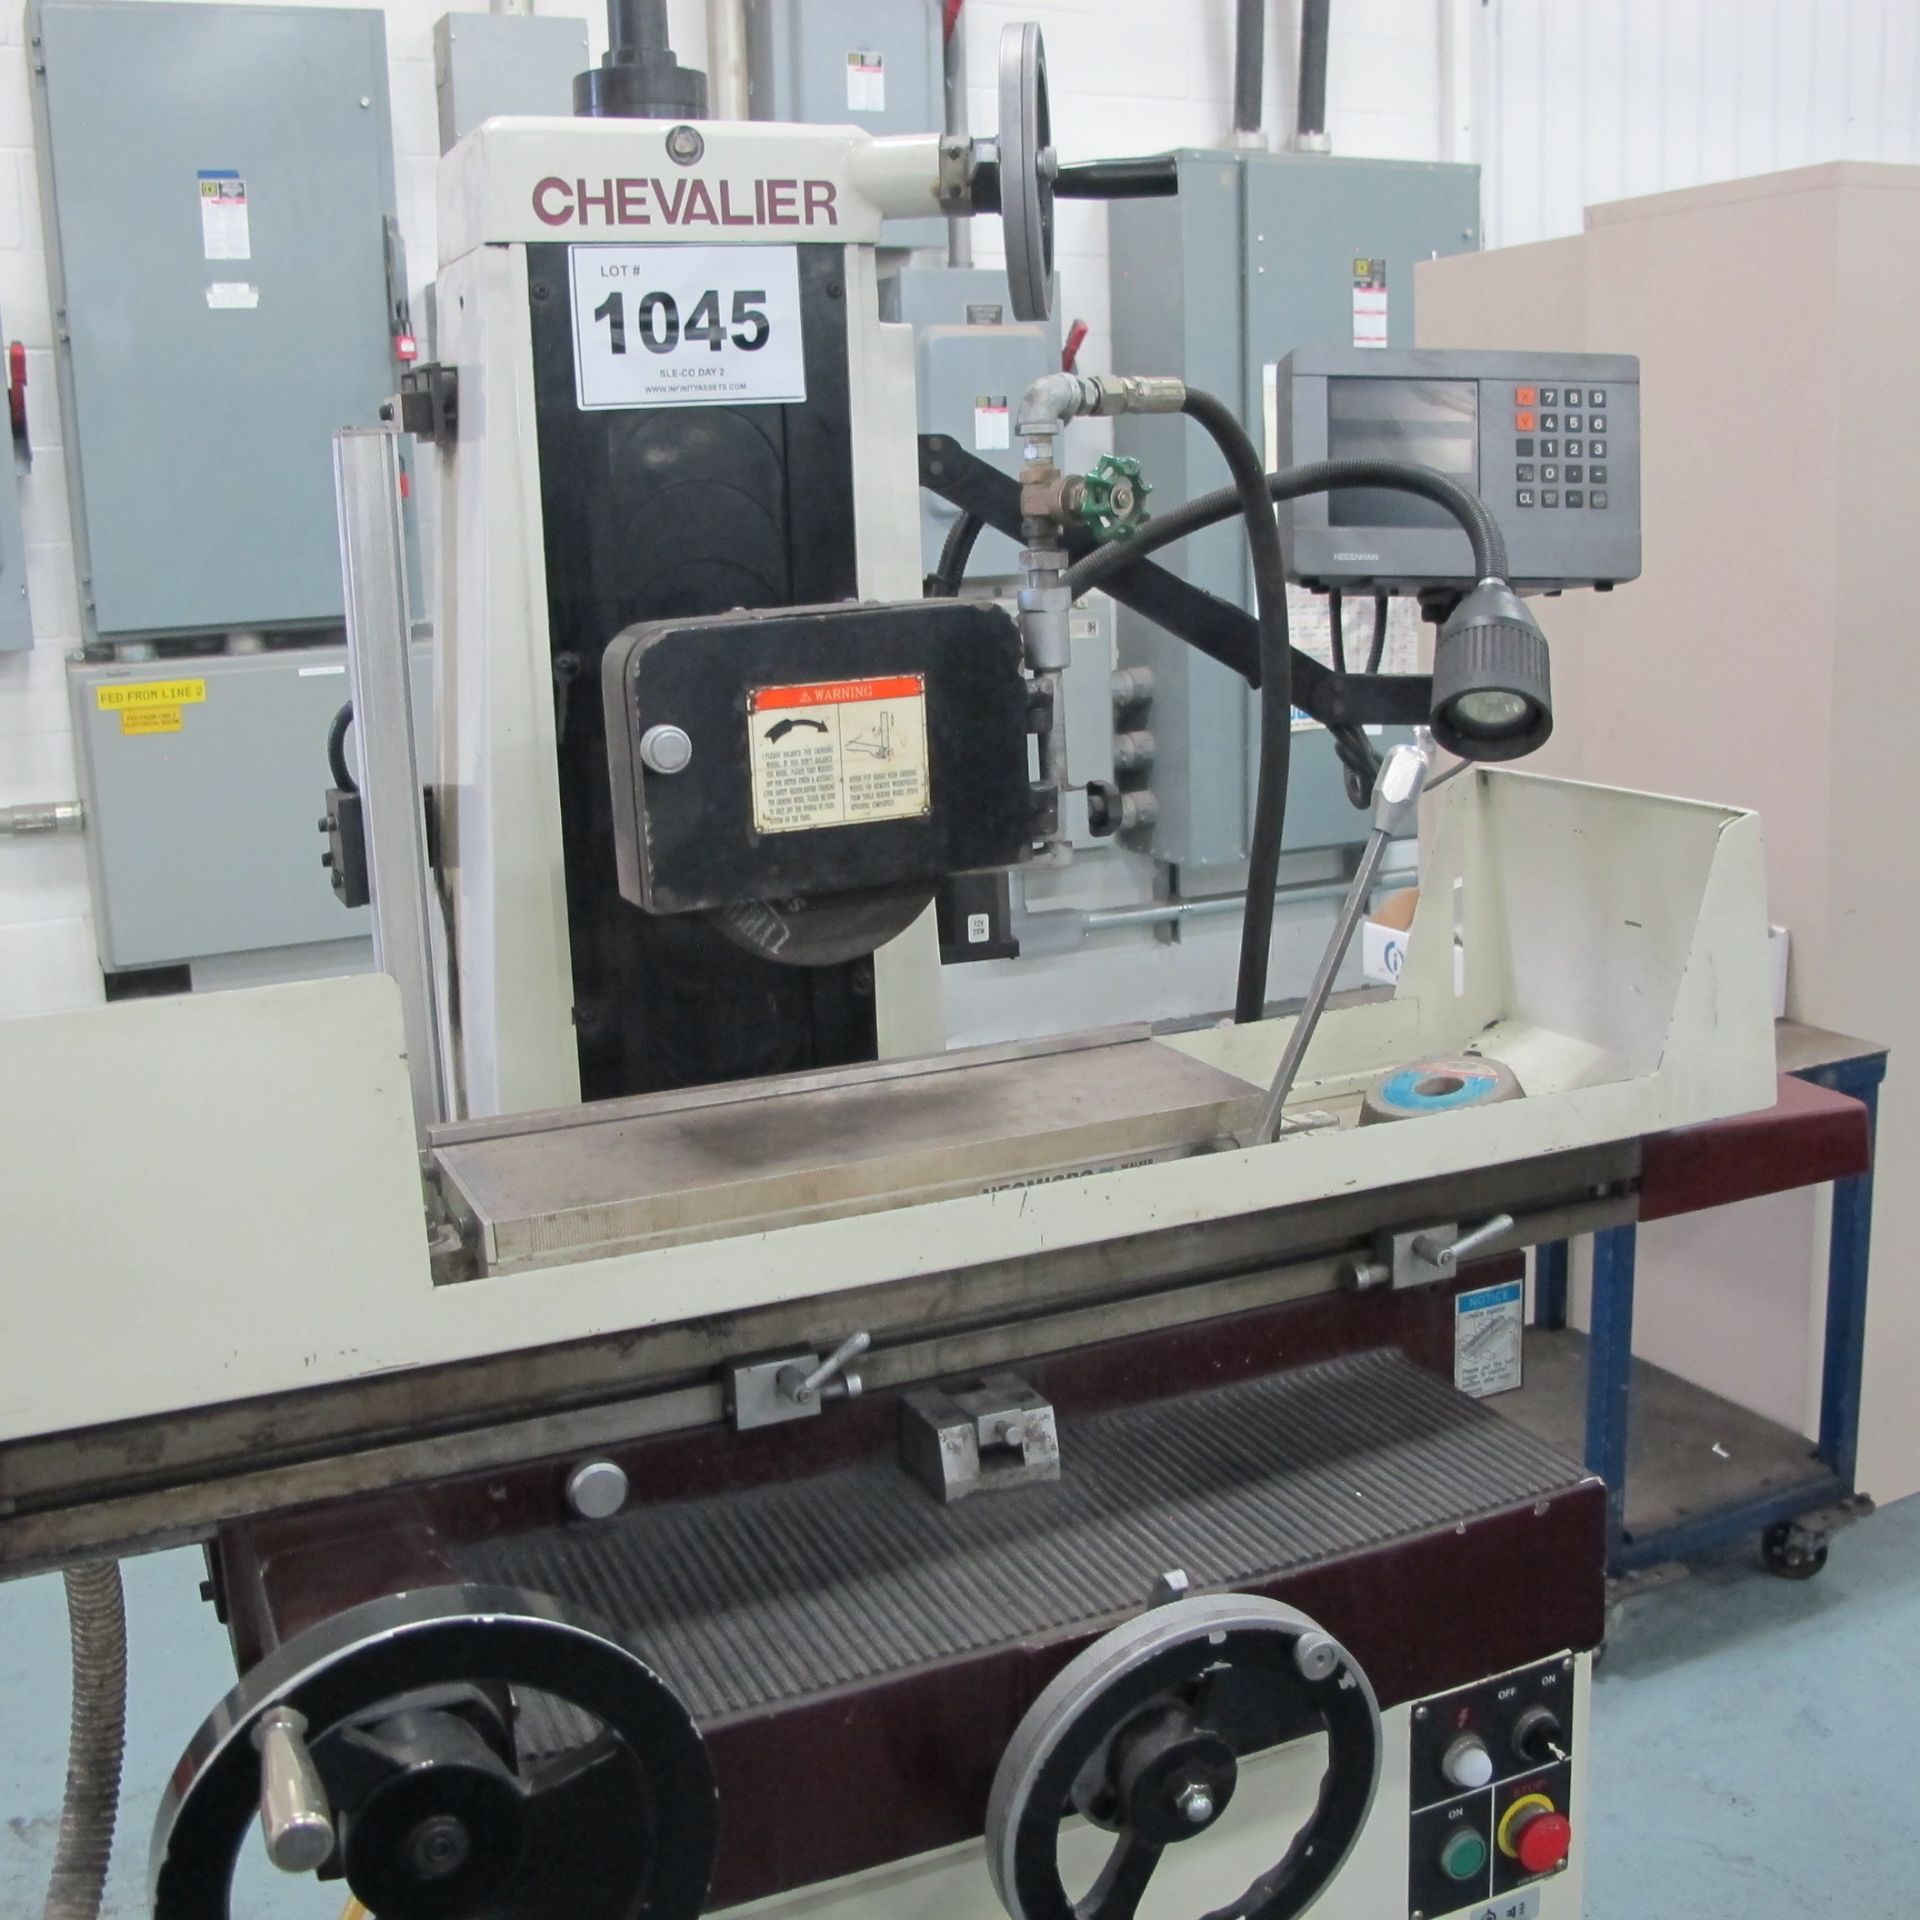 CHEVALIER FSG-618M MANUAL SURFACE GRINDER, HEIDENHAIN DRO S/N: A3937004, 6" X 18" MAGNETIC CHUCK - Image 2 of 5